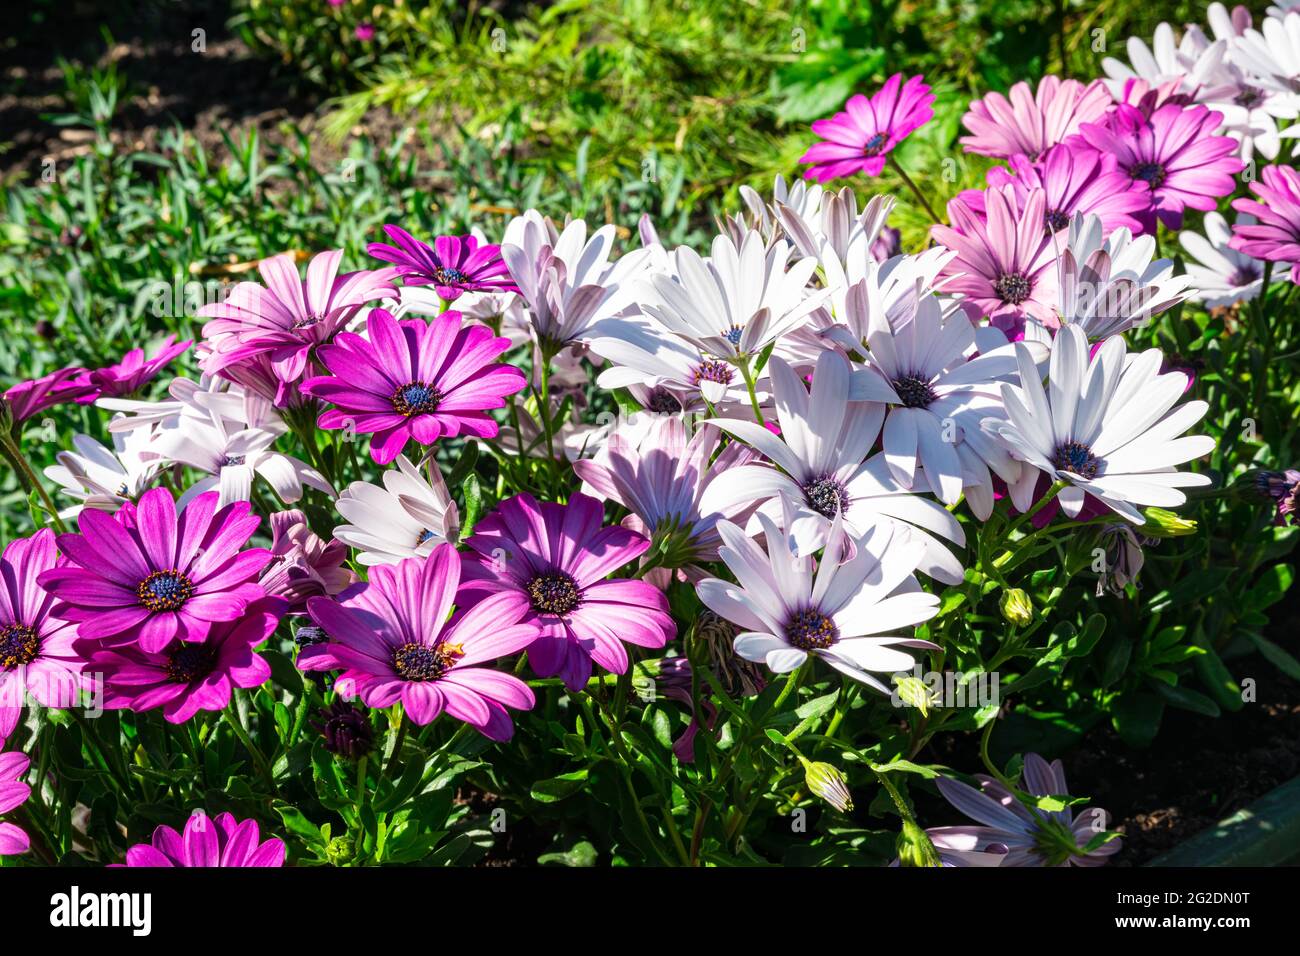 White and purple colored African daisies (Osteospermum) in a garden Stock Photo